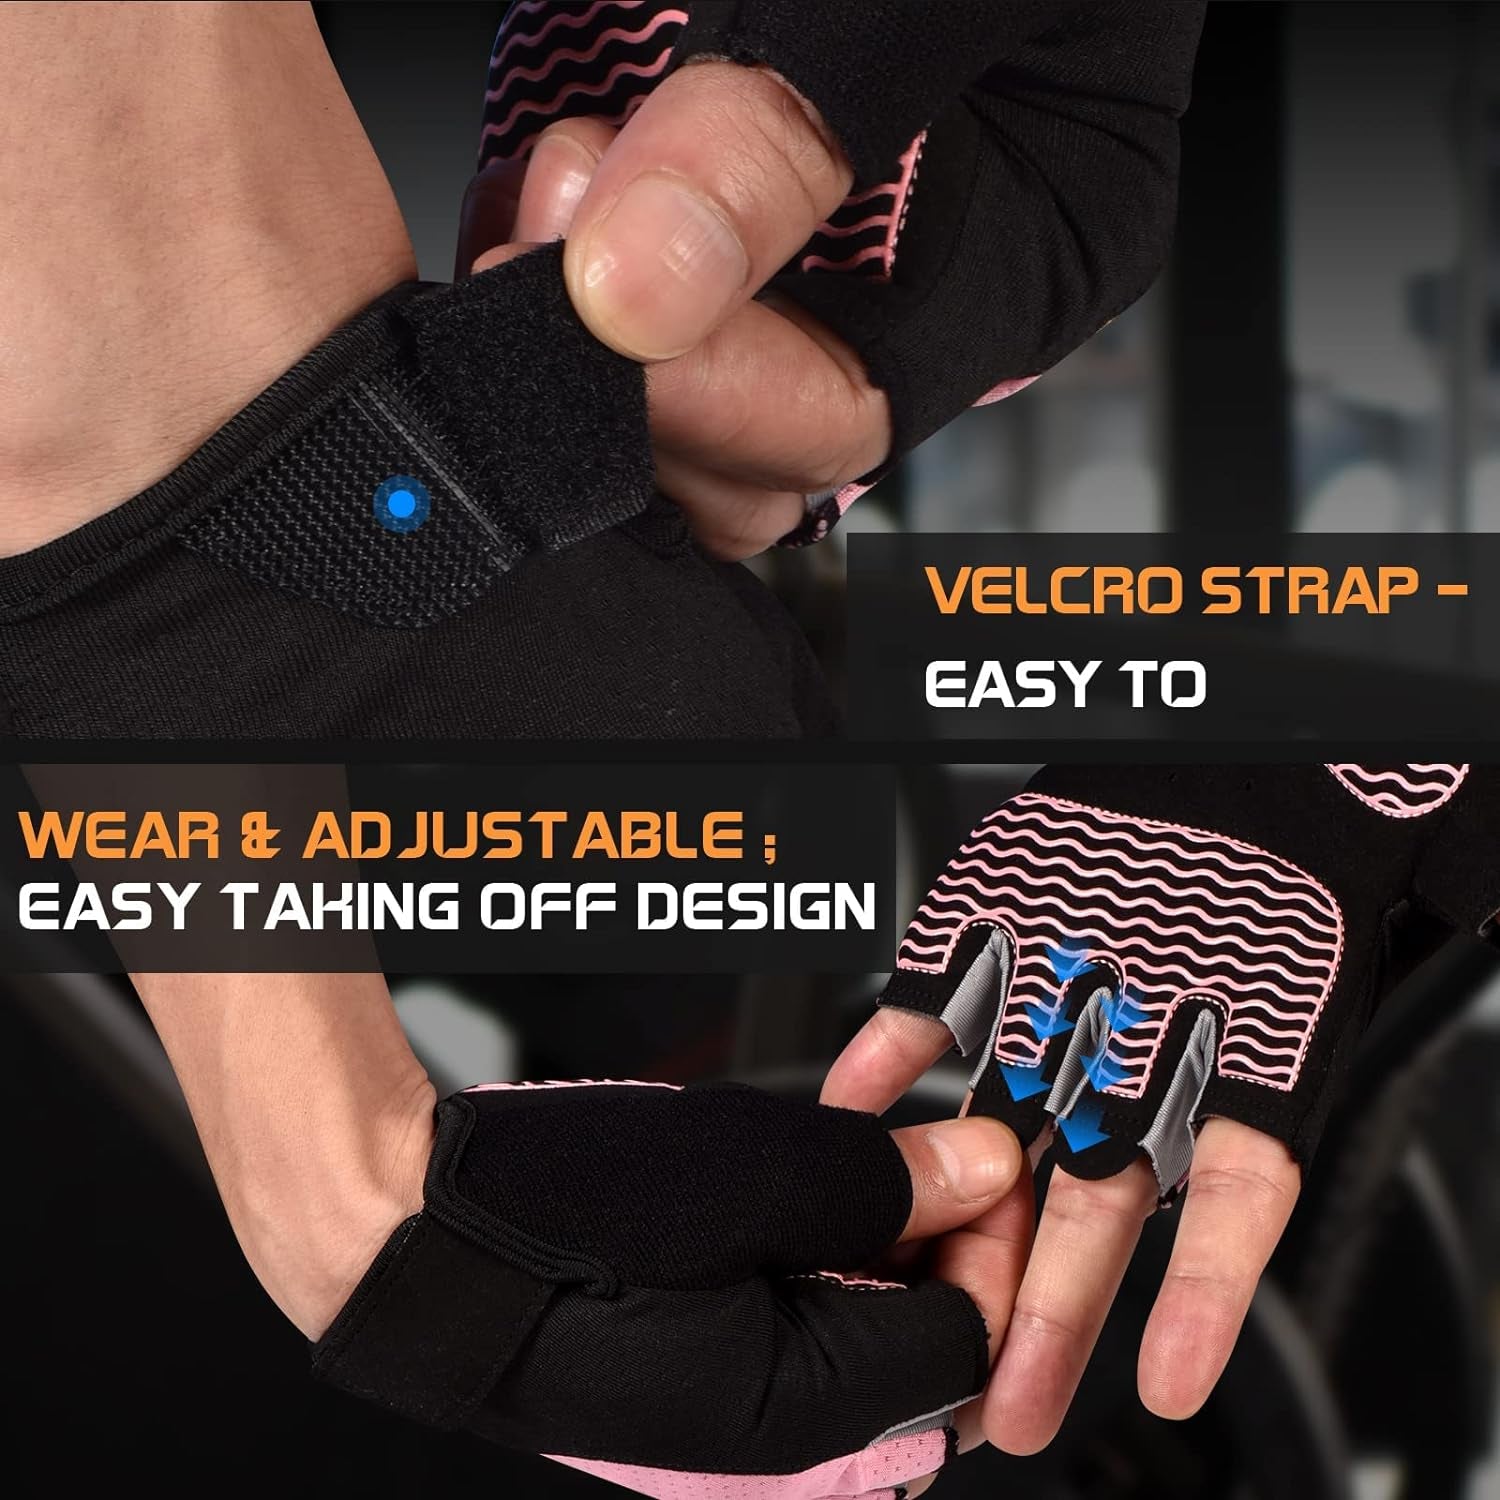 Gym Gloves, Workout Gloves, Fingerless Gloves for Weightlifting, Lightweight Breathable Fitness Gloves, Sports Gloves for Training Lifting Weight Cycling Climbing Rowing